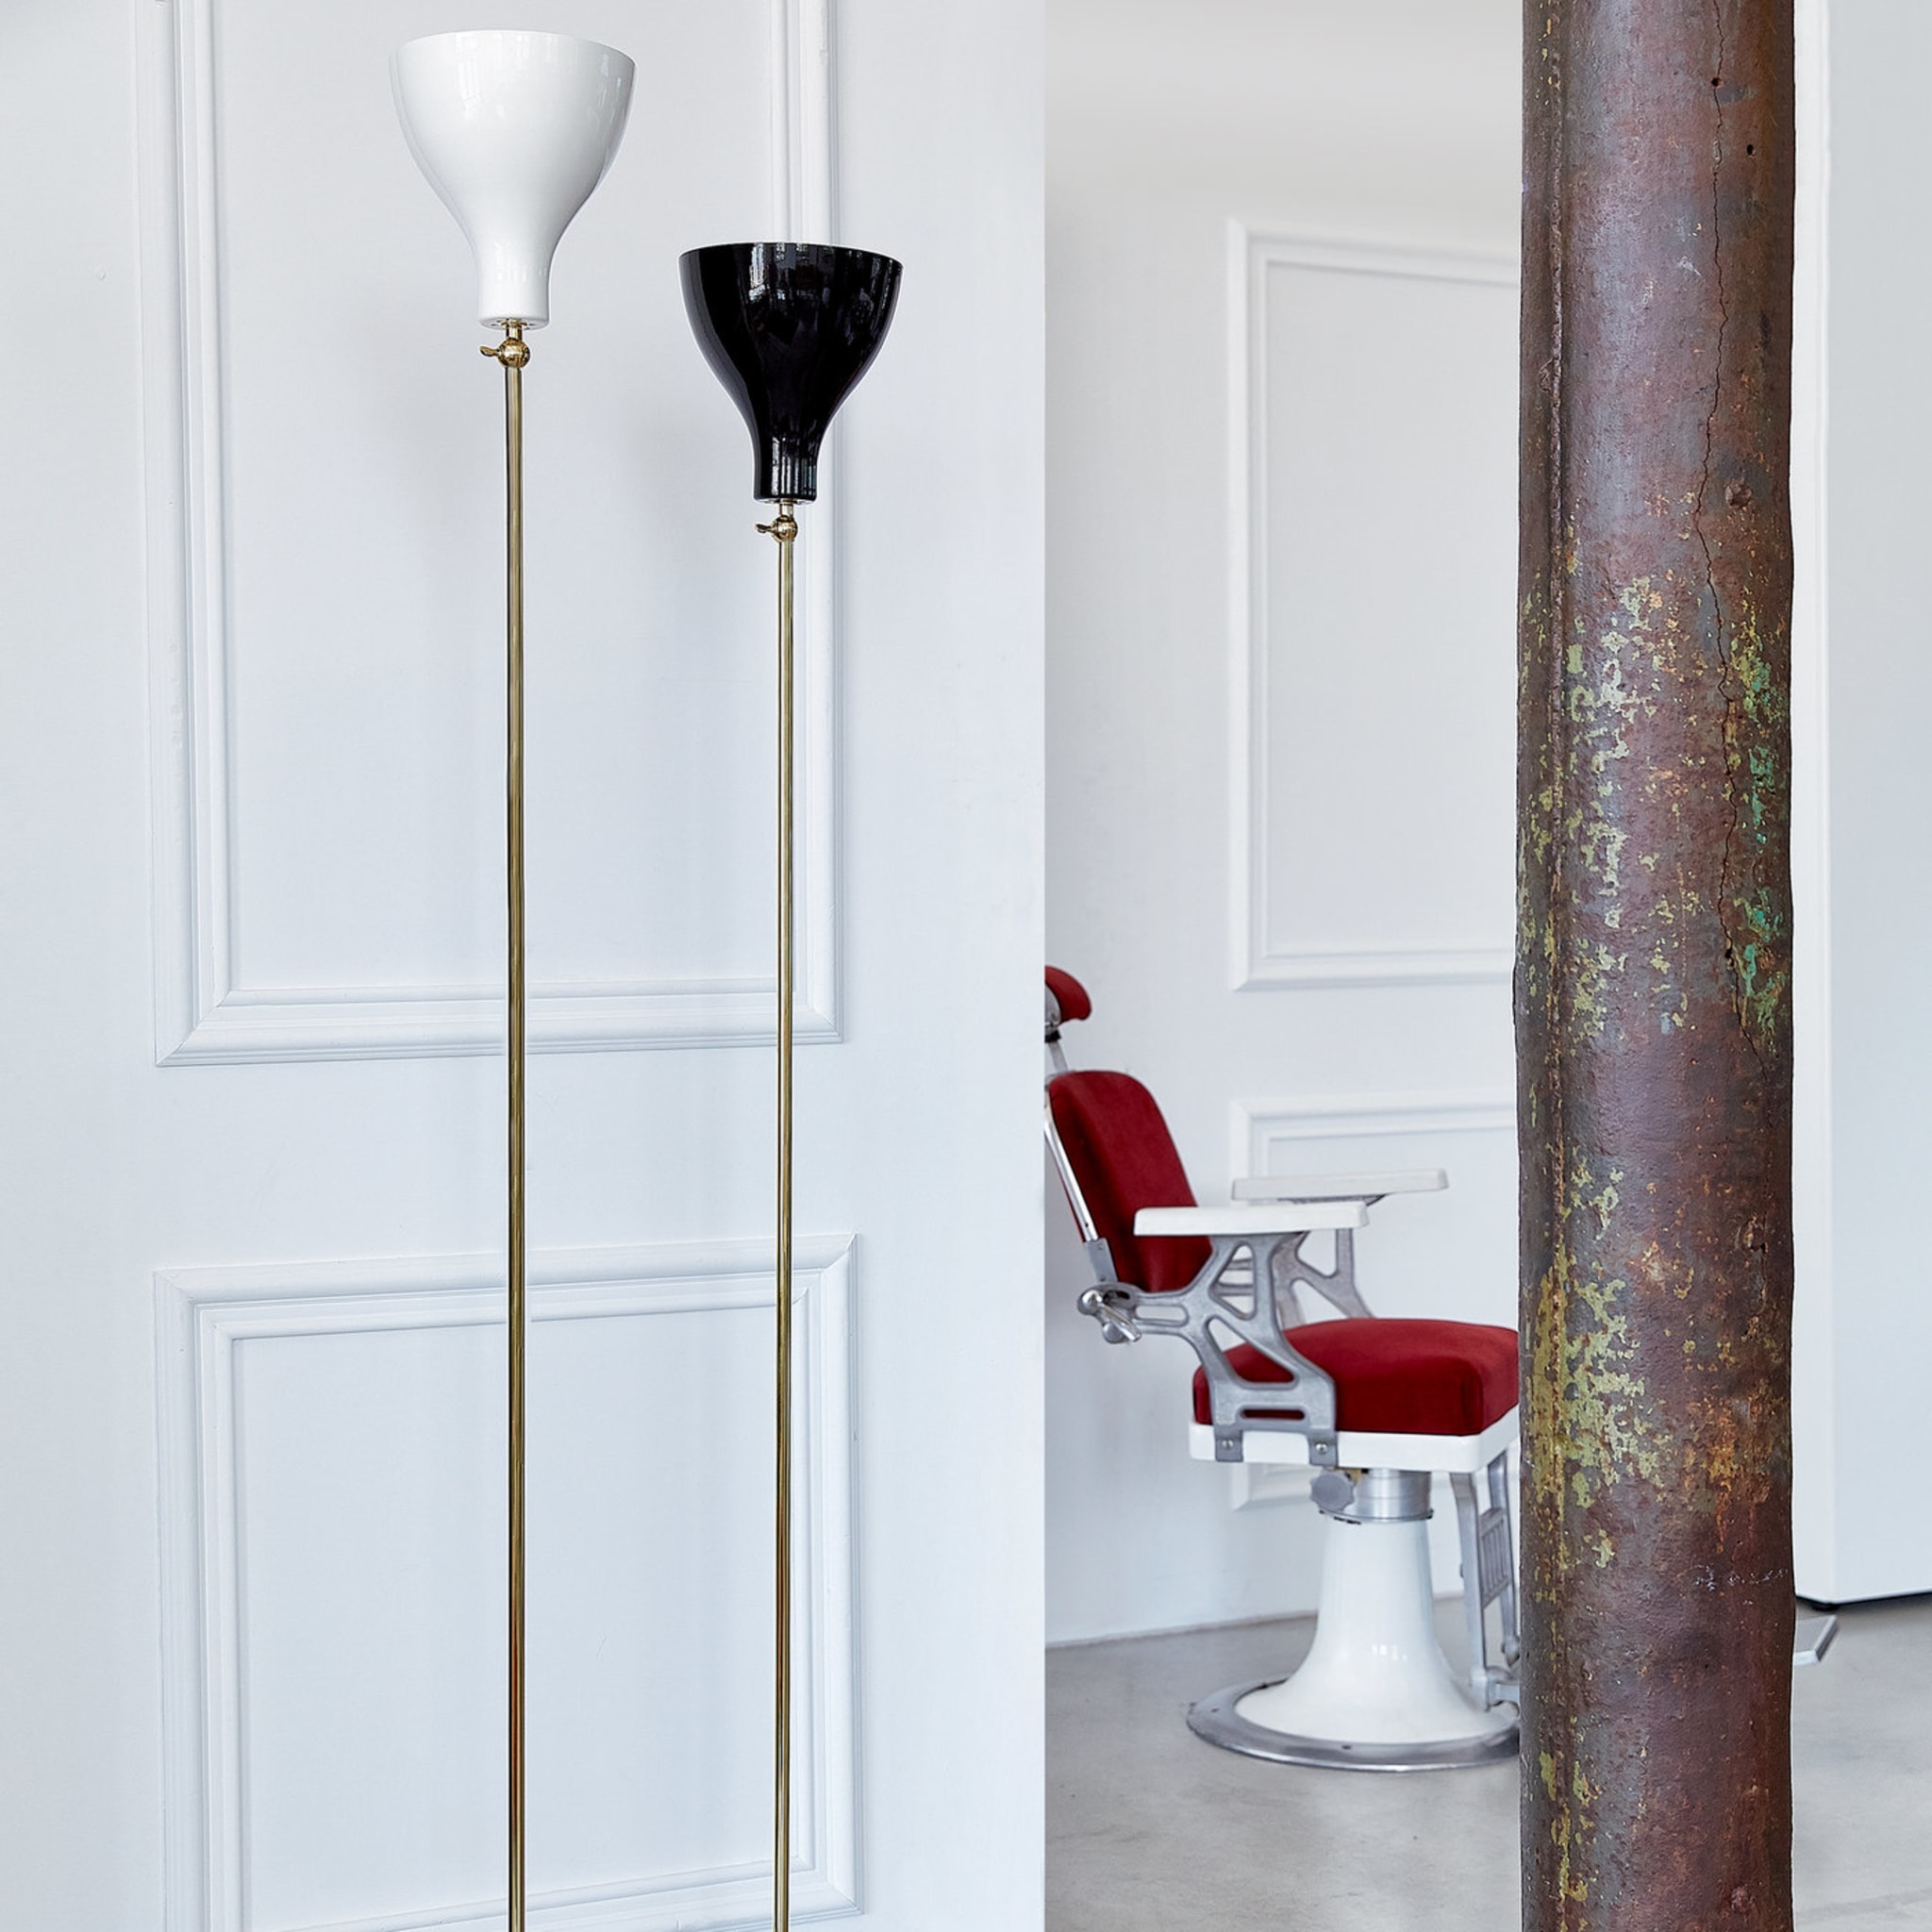 Lady V Black and White Tall Floor Lamp in Brass - Alternative view 2